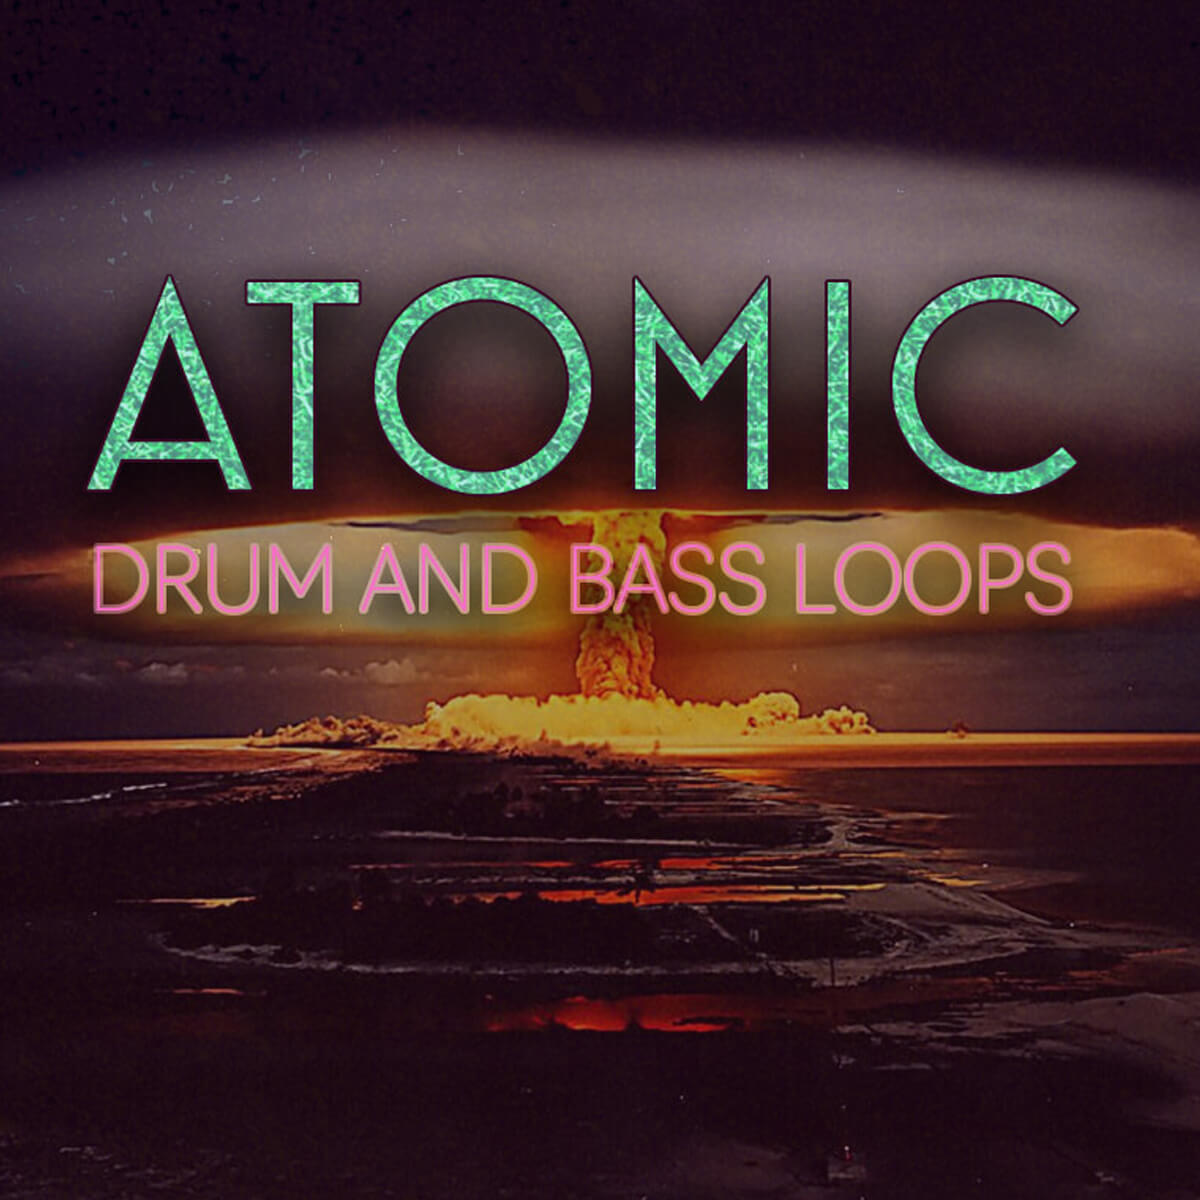 Atomic Drum and Bass Loops